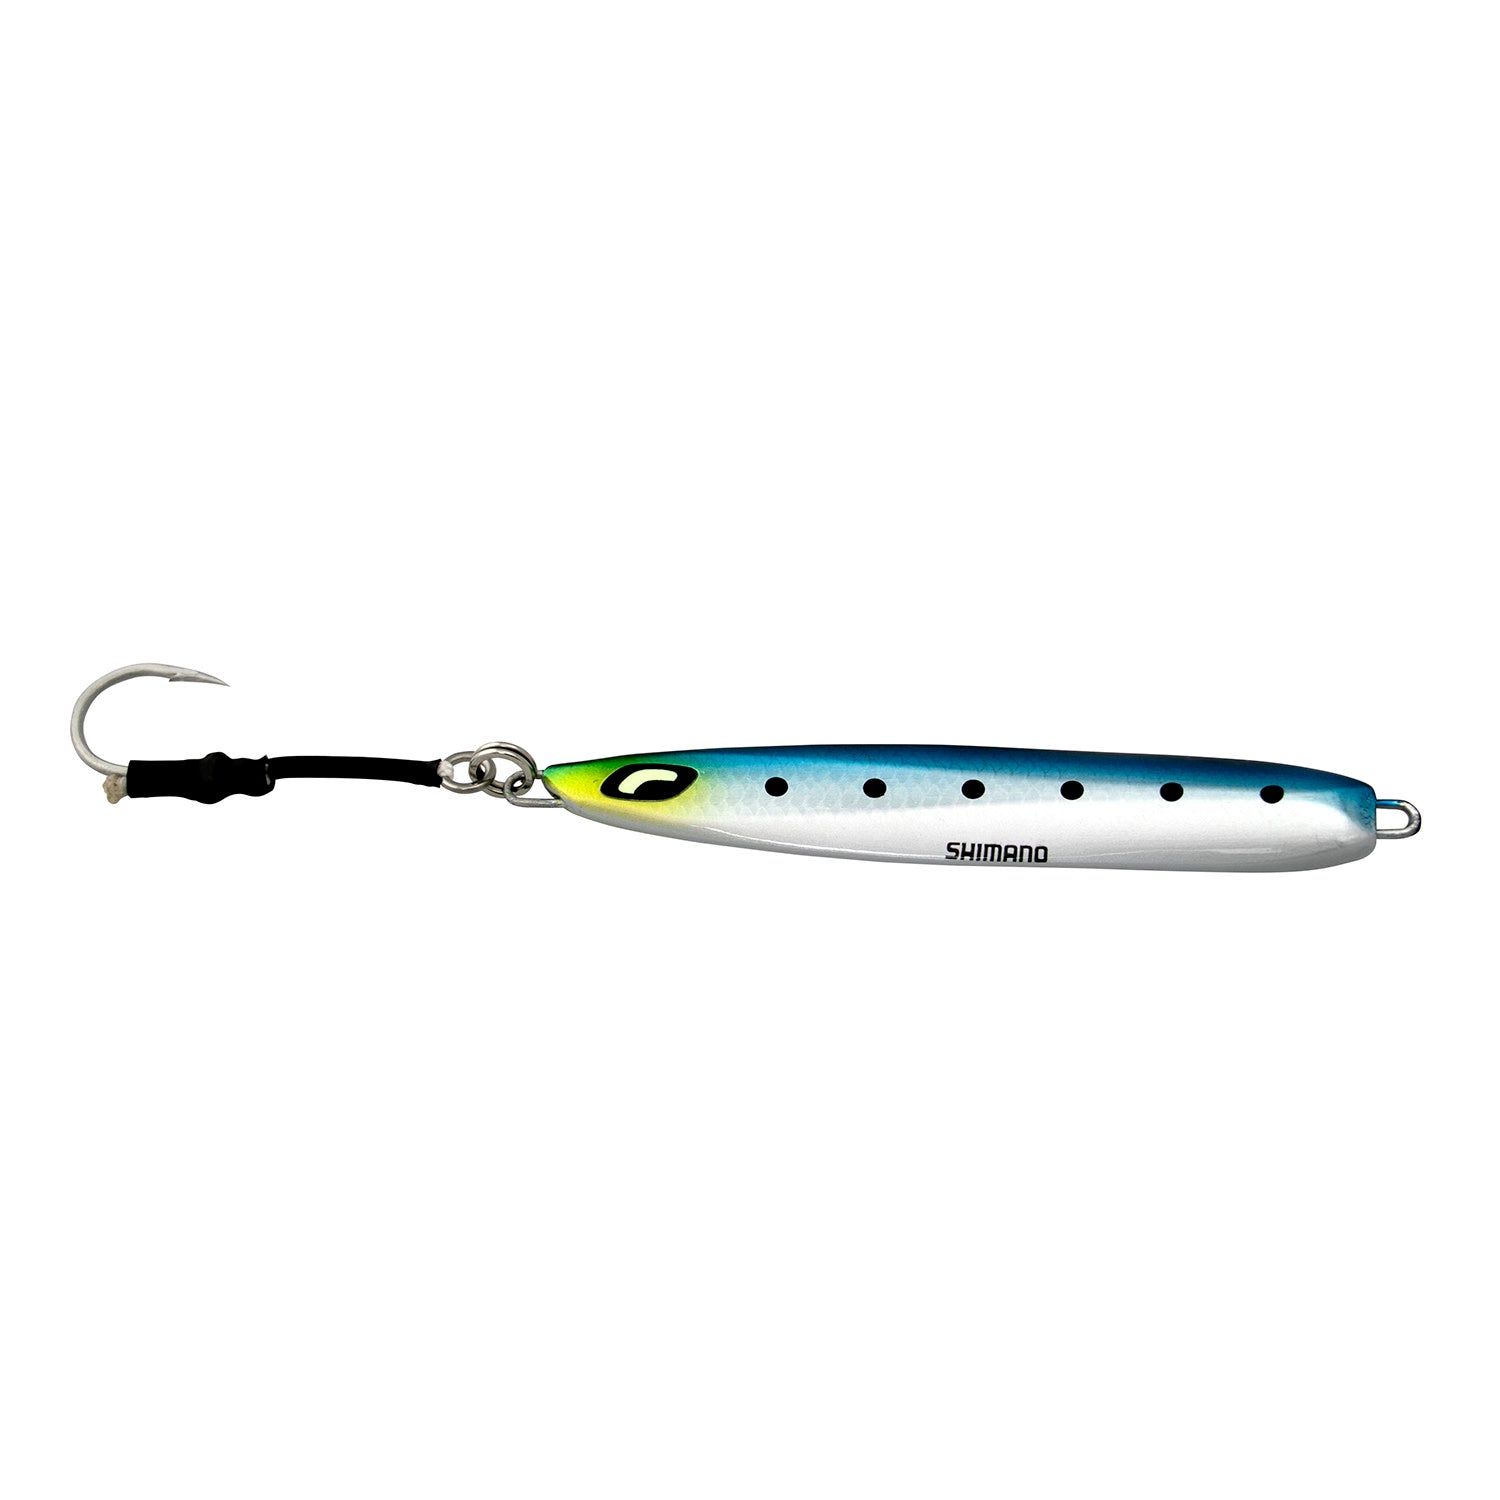 SHIMANO Rear Weighted Double-Side Colored Jig Lure OCEA WING 160g RG Zebra